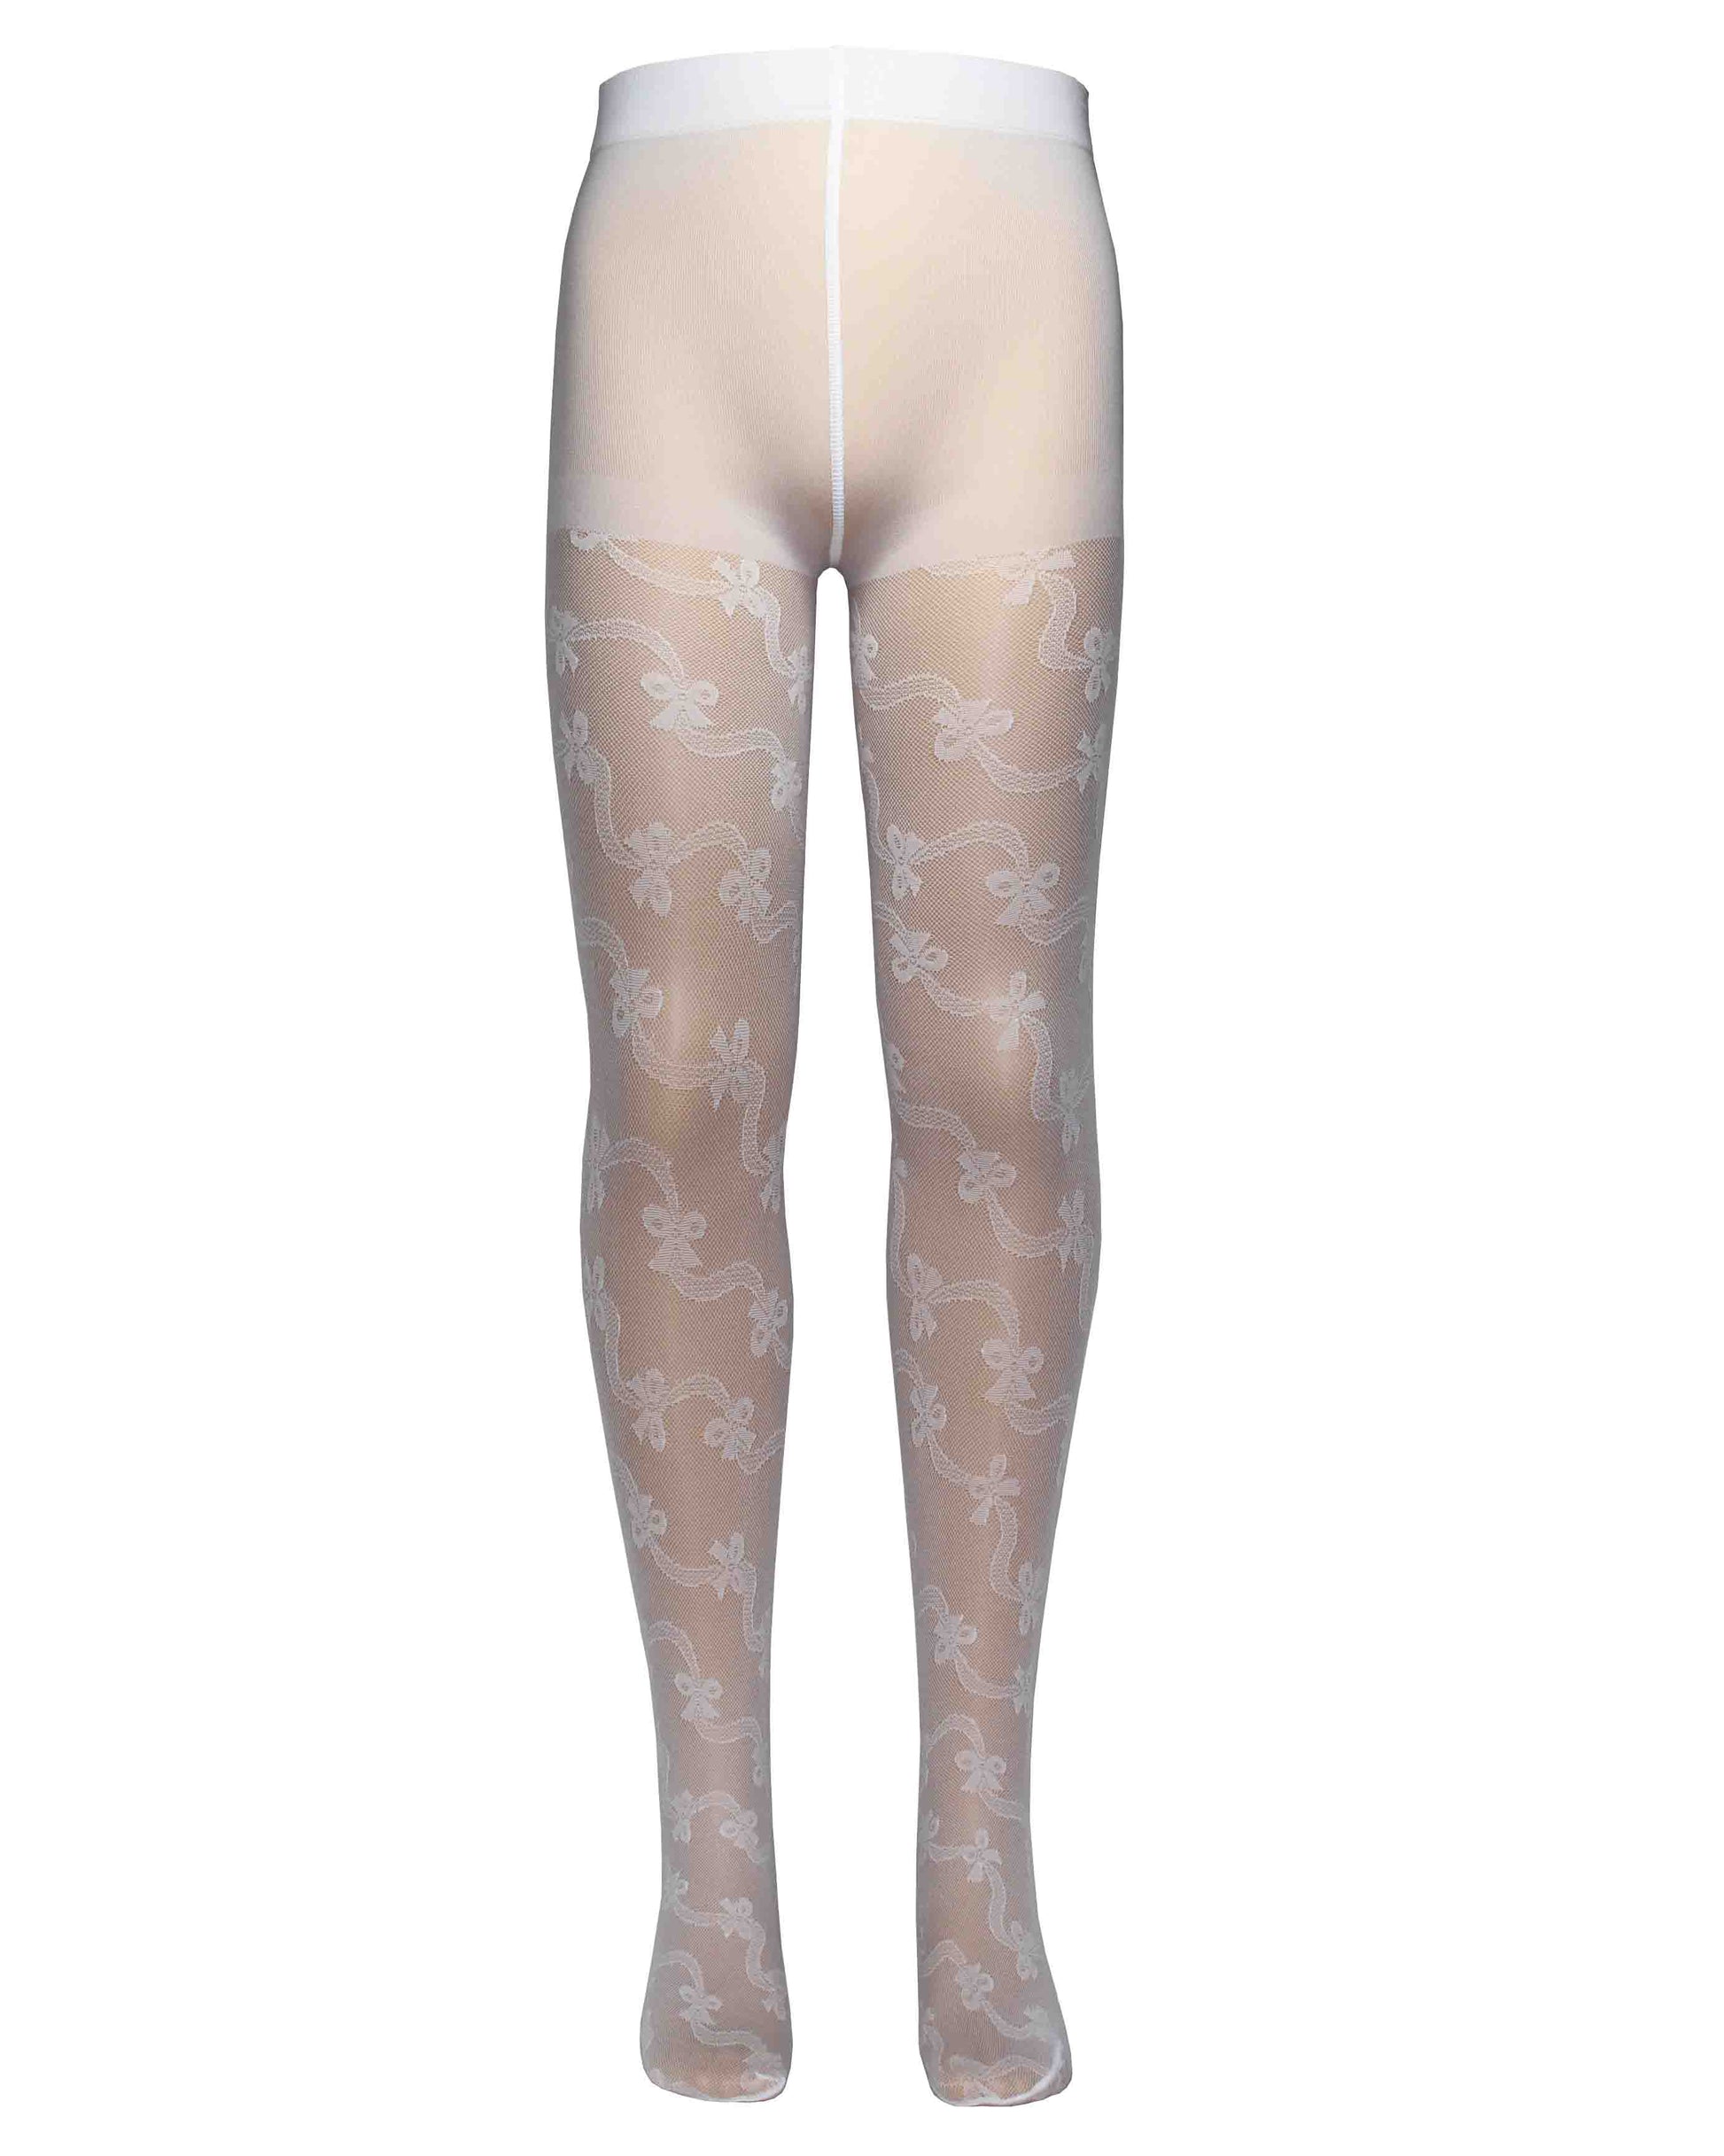 Omsa Serenella Gala Collant - White semi opaque kid's fashion tights with a woven ribbon and bow style pattern, perfect for communions and weddings